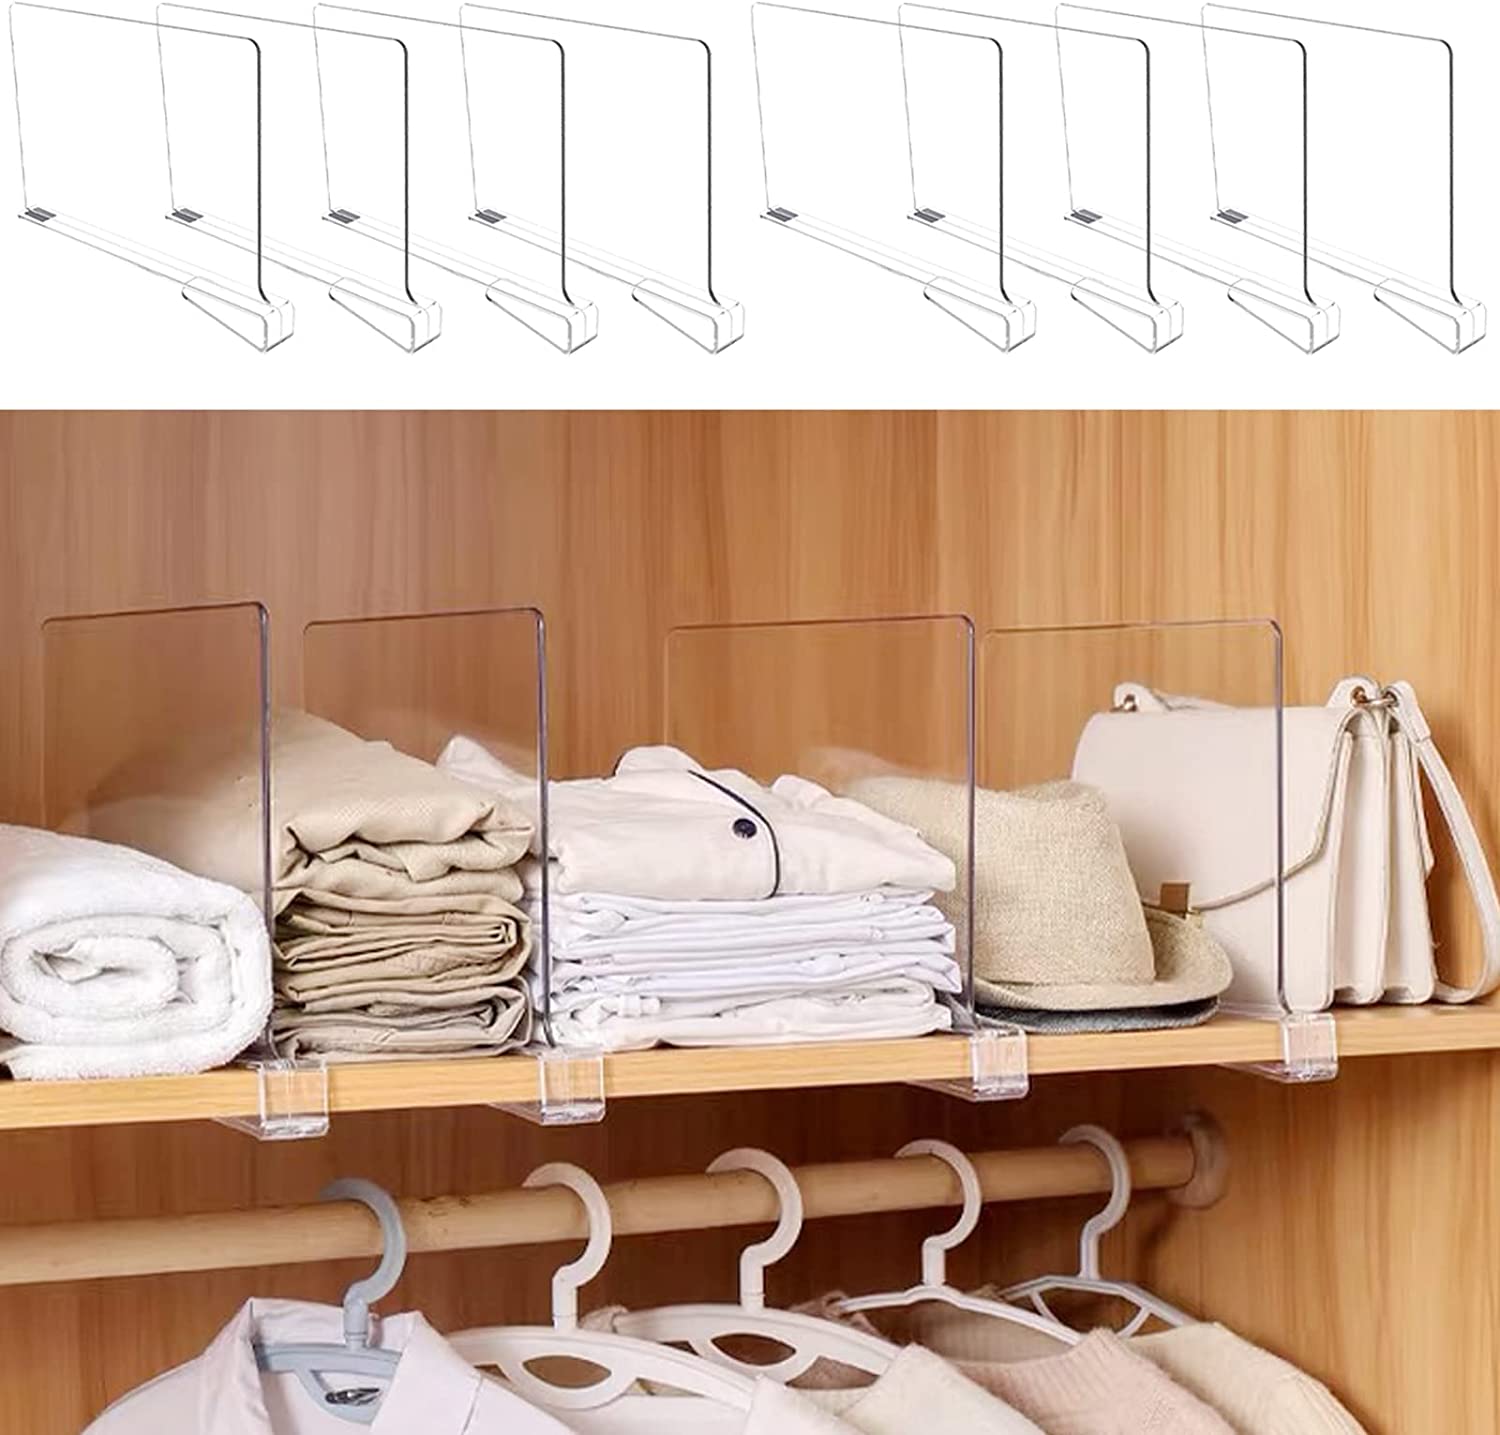 How to organise your underwear drawer